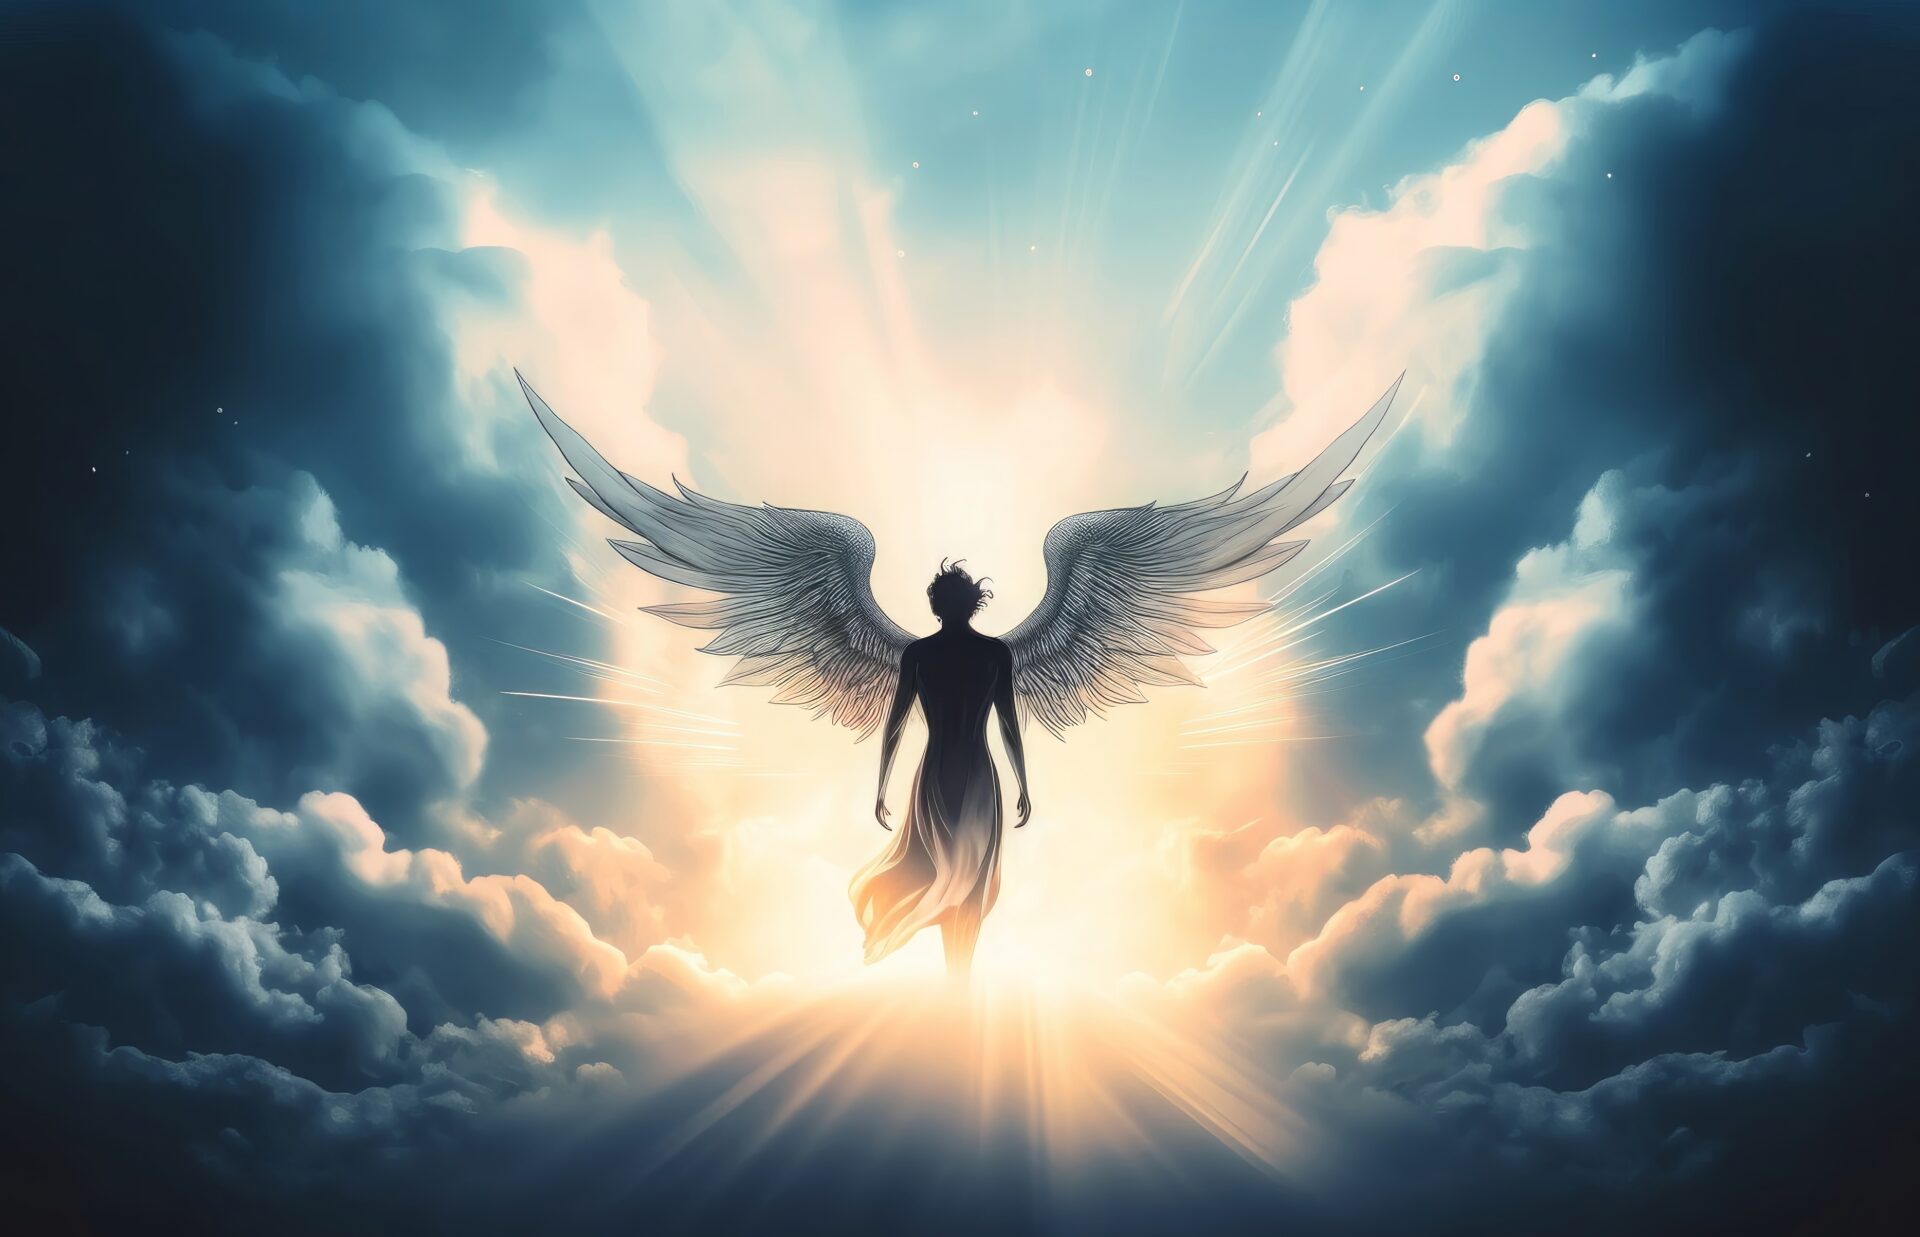 An Angel Prayer to Remove Obstacles